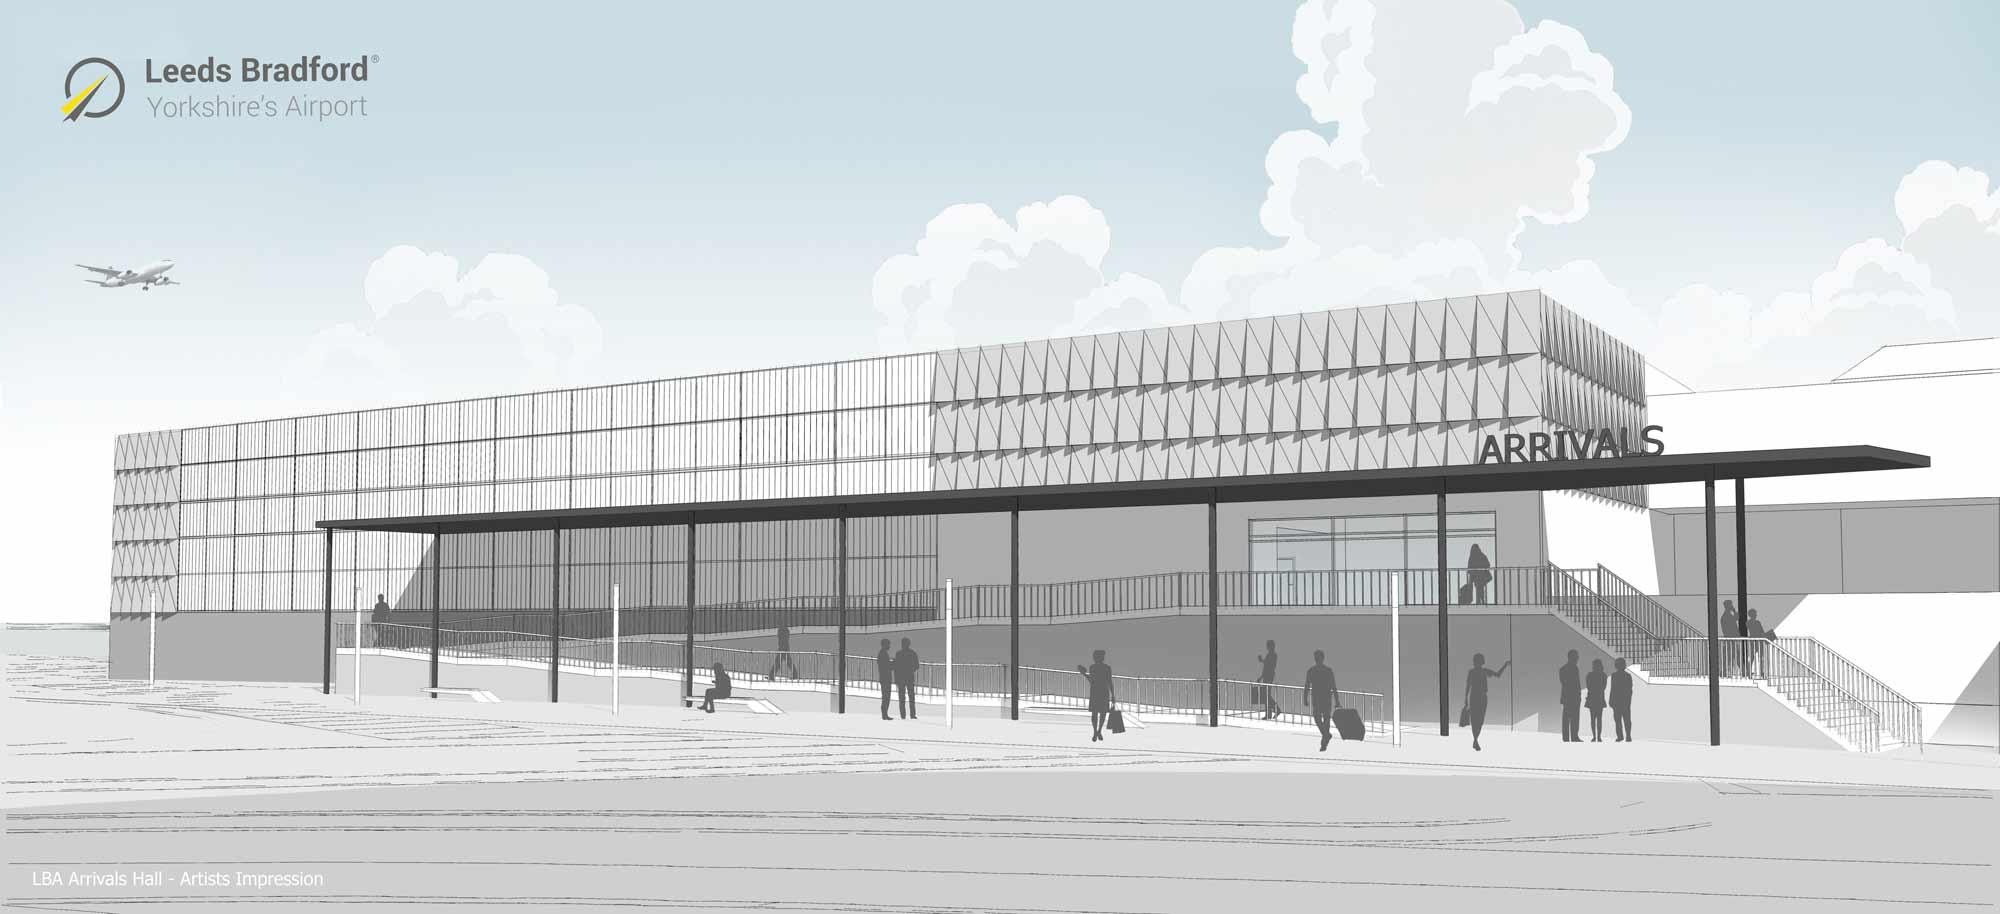 Leeds Bradford Airport is delighted to announce the next phase of its redevelopment plan